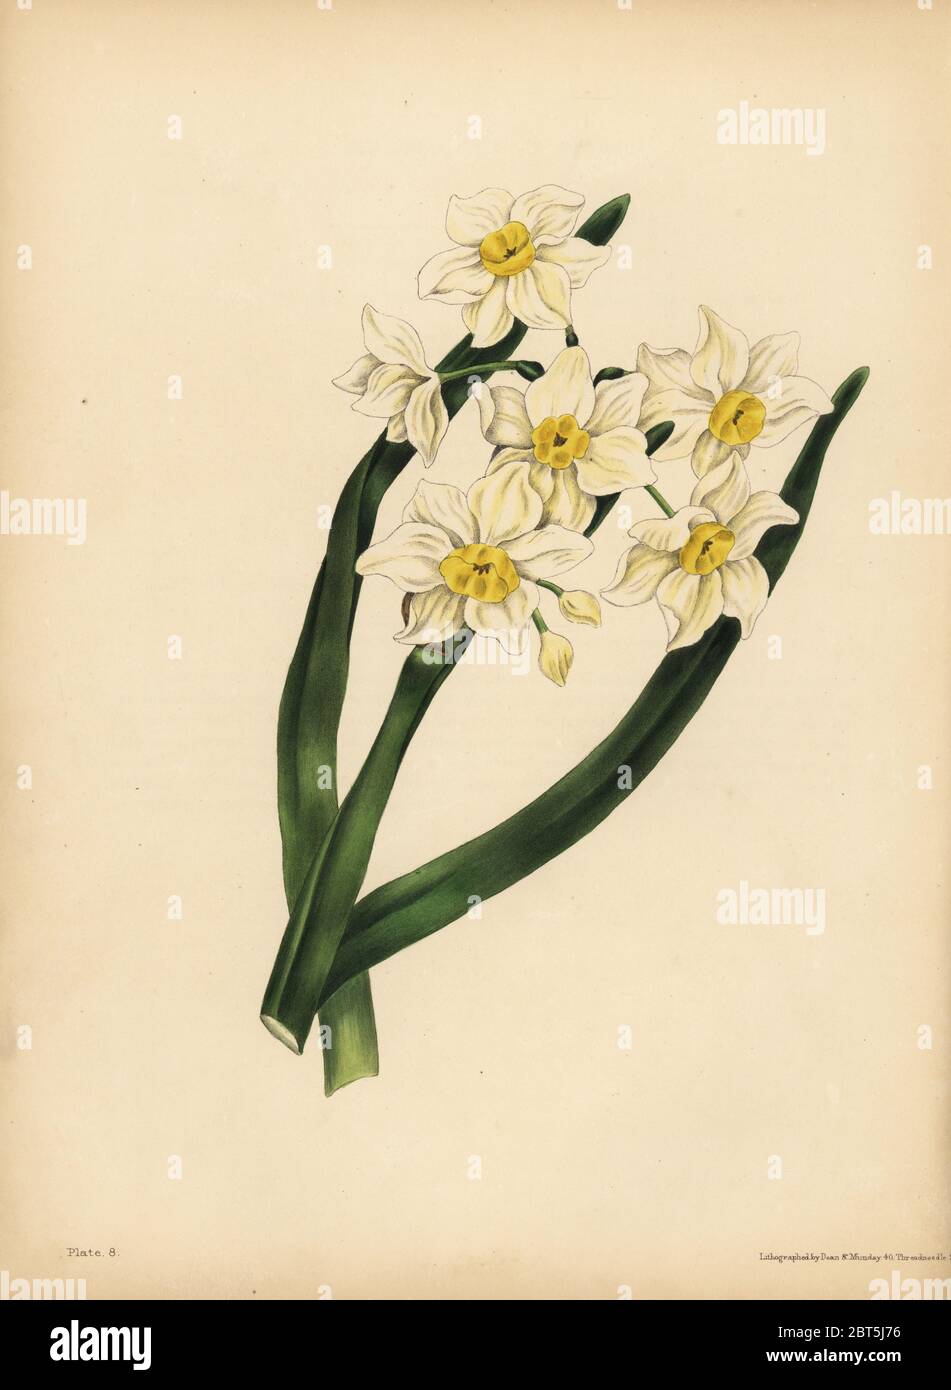 The snow flake-leaved Narcissus, Egotism and self-love. Handcoloured lithograph by Dean and Munday after an illustration by Eliza Eve Gleadall from The Beauties of Flora, with botanic and poetic illustrations, being a selection of flowers drawn from nature arranged emblematically, Heath Hall, Wakefield, 1834. Stock Photo